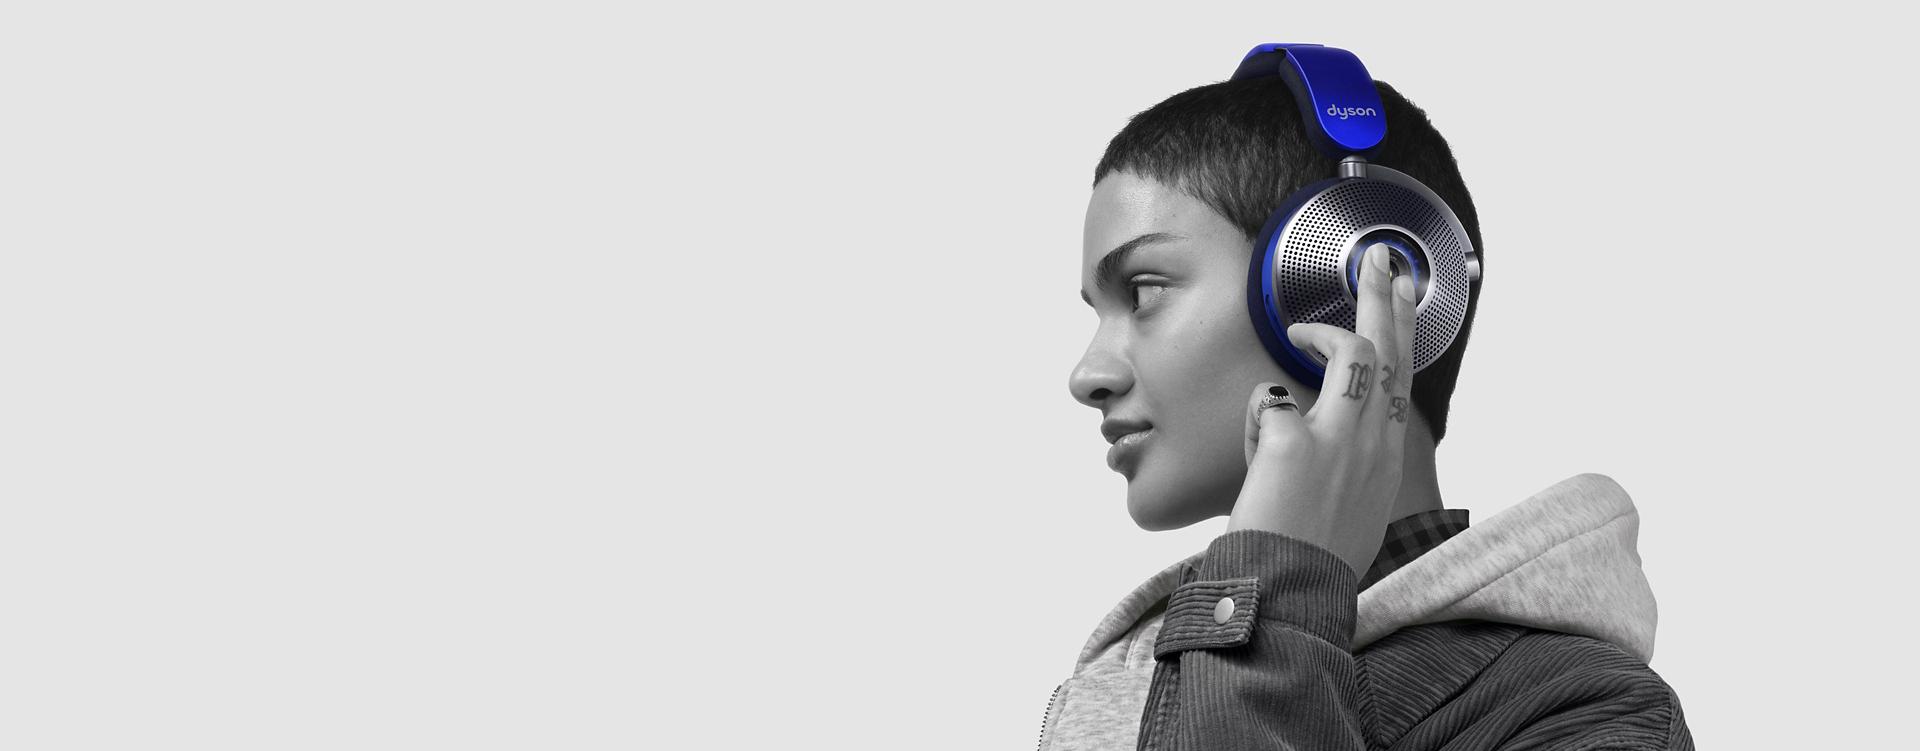 Woman wearing the Dyson Zone noise cancelling headphones